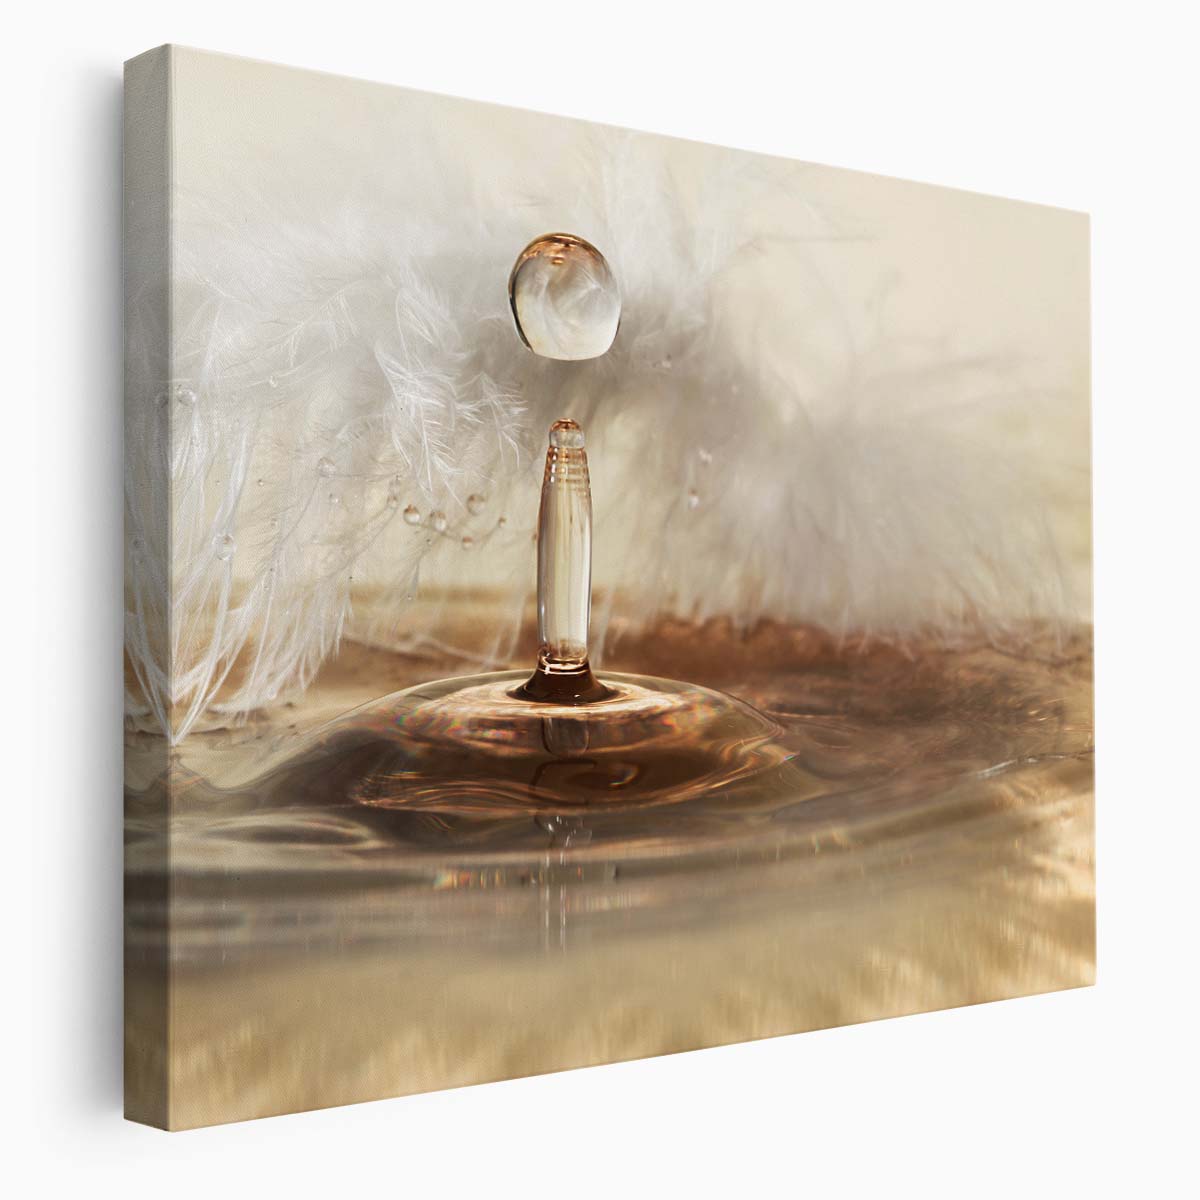 Golden Feather & Water Droplet Abstract Wall Art by Luxuriance Designs. Made in USA.